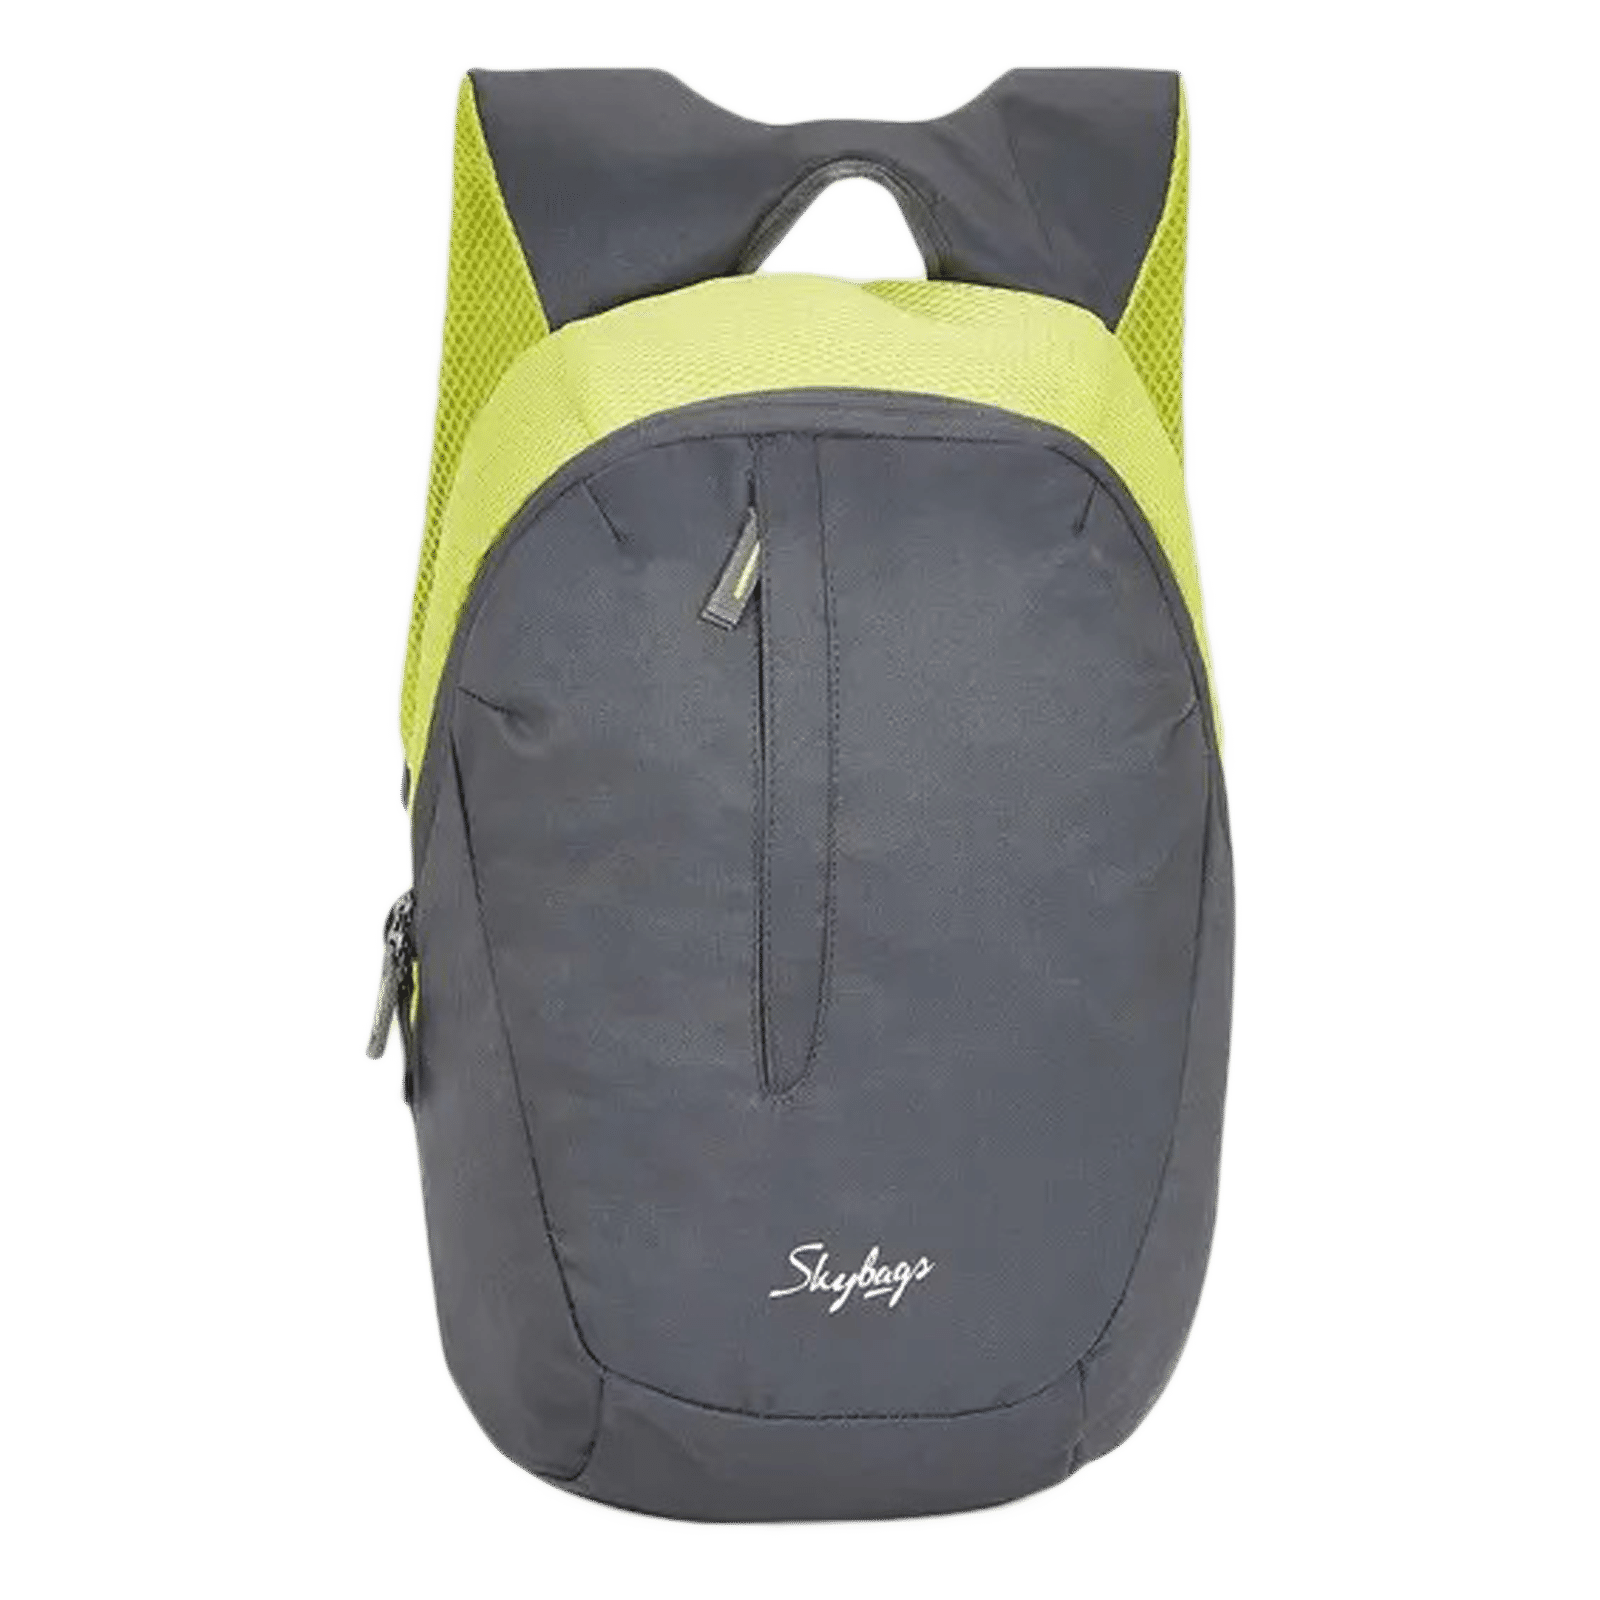 Skybags Unisex Navy Blue & Yellow Backpack Price in India, Full  Specifications & Offers | DTashion.com